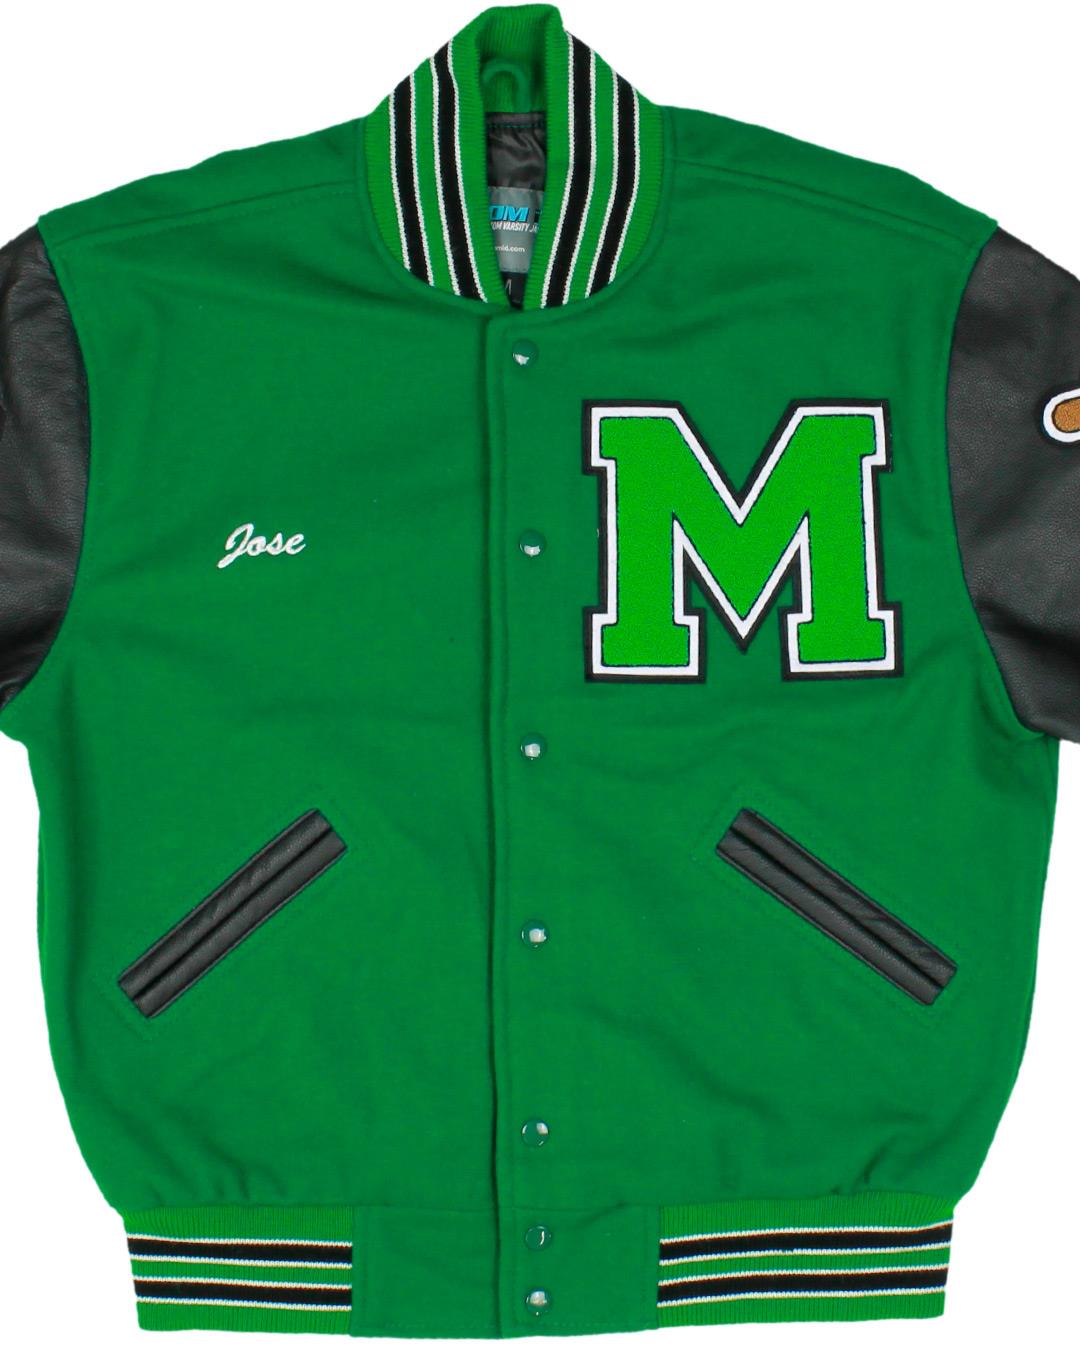 Moriarty High School Letterman Jacket, La Moriarty, NM - Front